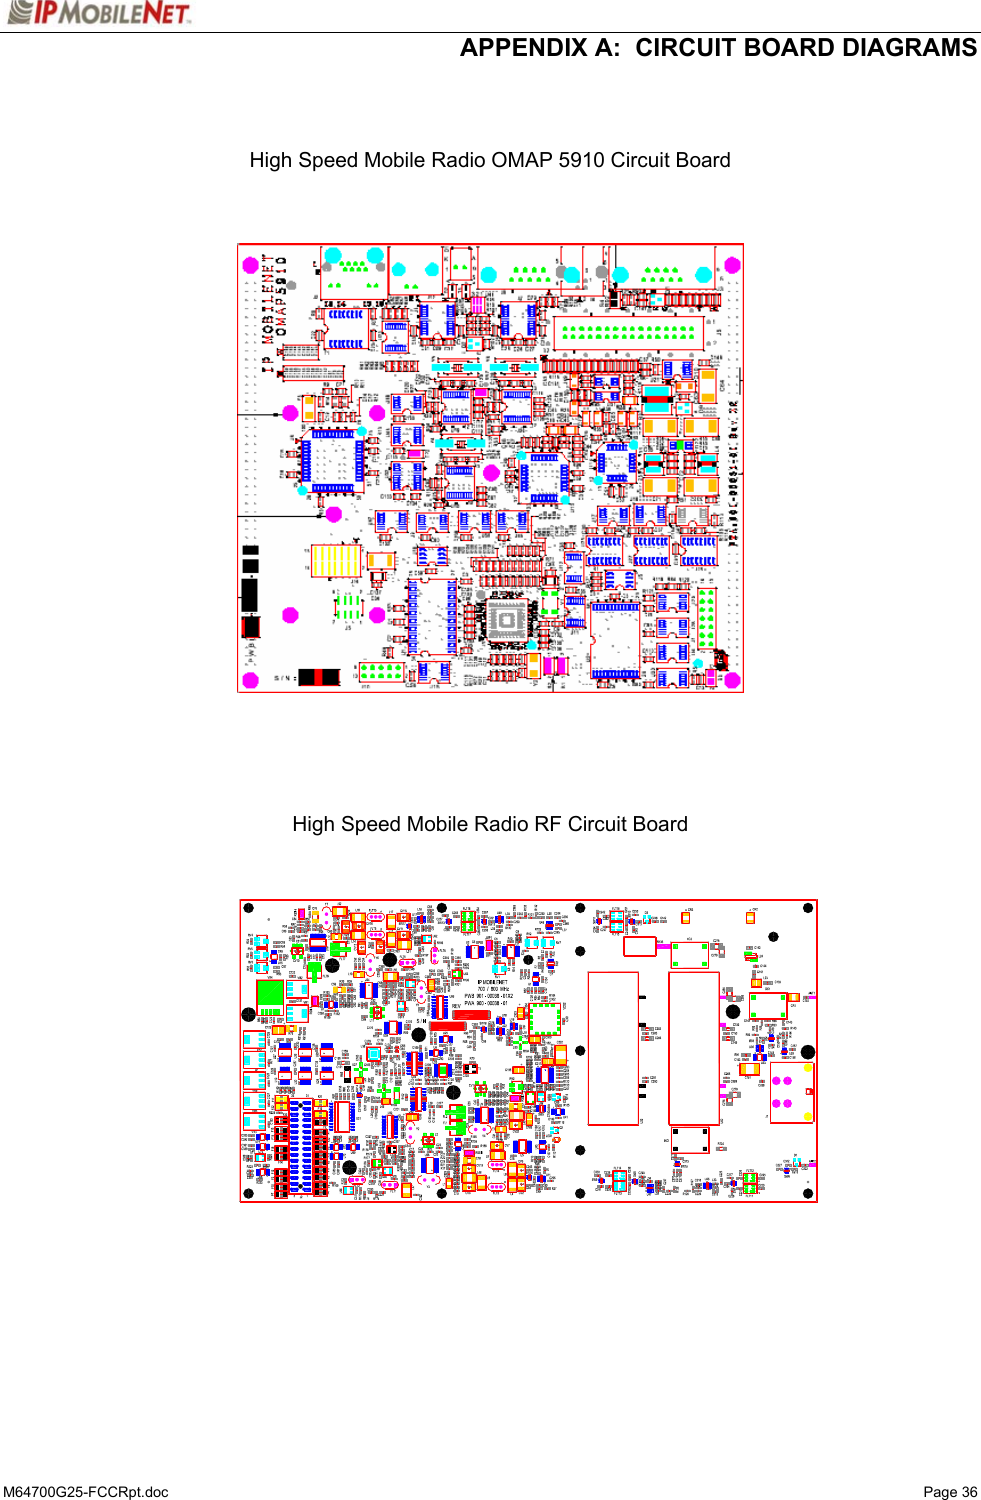  APPENDIX A:  CIRCUIT BOARD DIAGRAMS M64700G25-FCCRpt.doc   Page 36 ++++++++++   High Speed Mobile Radio OMAP 5910 Circuit Board          High Speed Mobile Radio RF Circuit Board                   